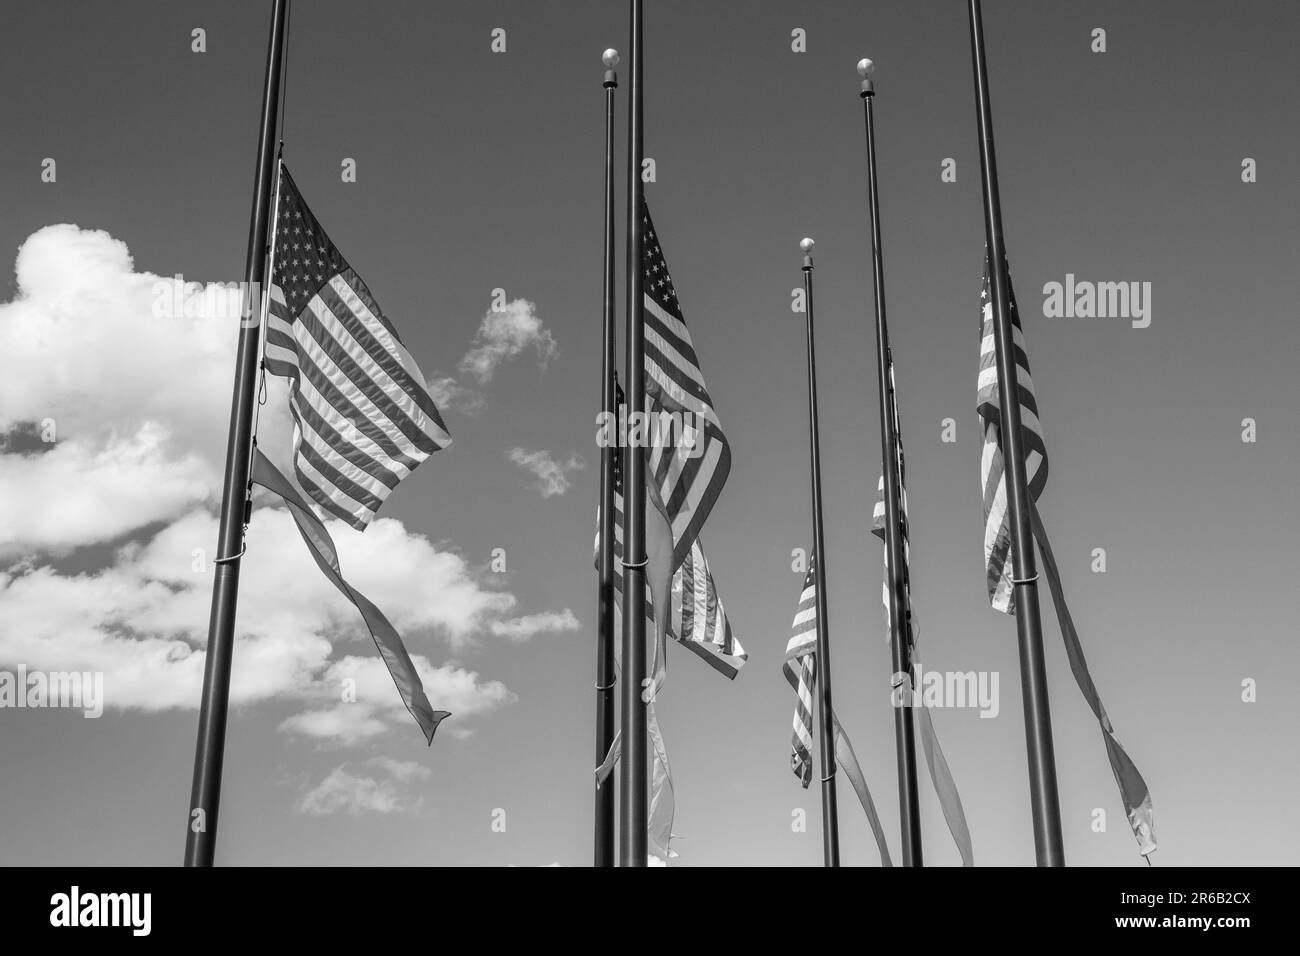 A high-resolution black and white image of four American flags fluttering in the wind against a cloudy sky Stock Photo